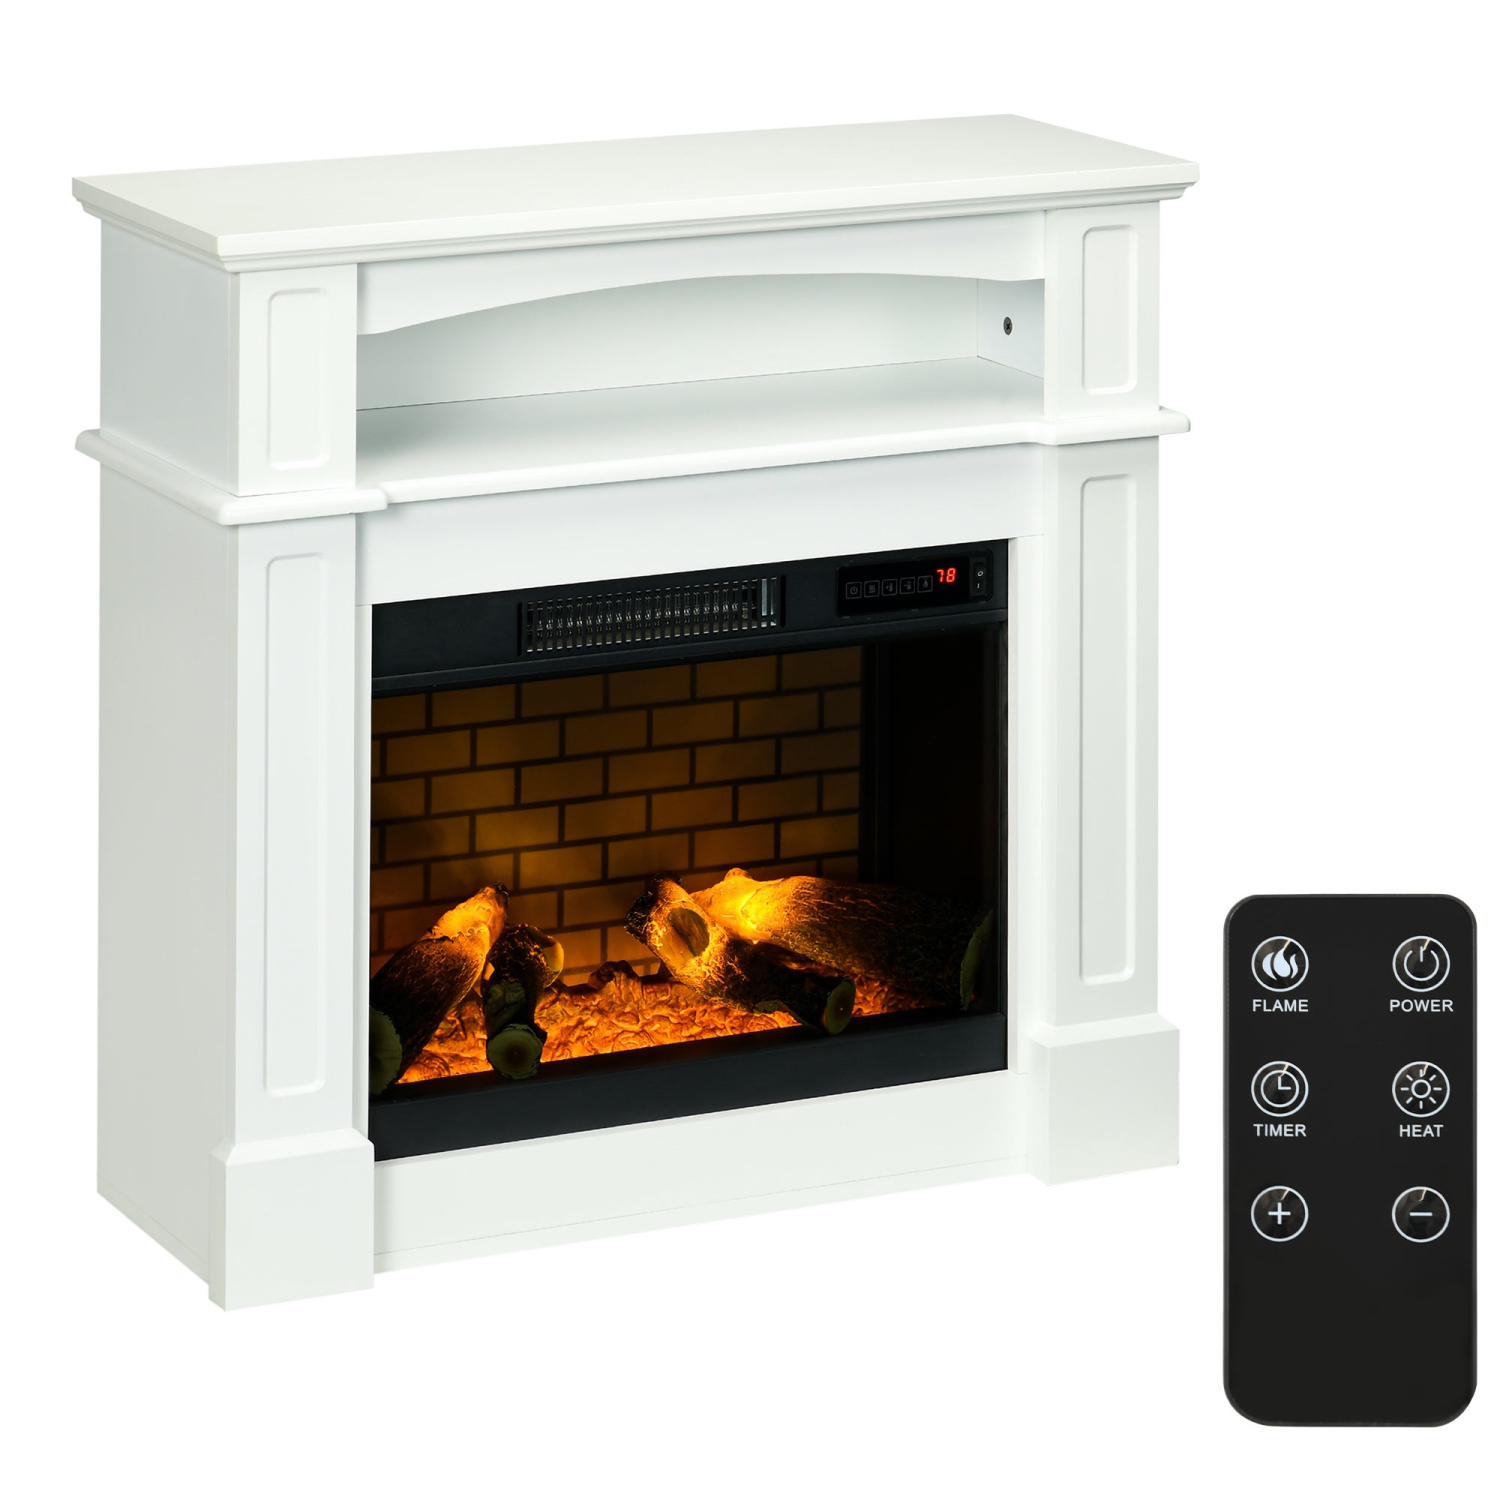 HOMCOM 32" Electric Fireplace Heater with Mantel, Freestanding Fireplace Stove with Log Hearth, Adjustable Realistic Flame and Remote Control, 700W/1400W, White